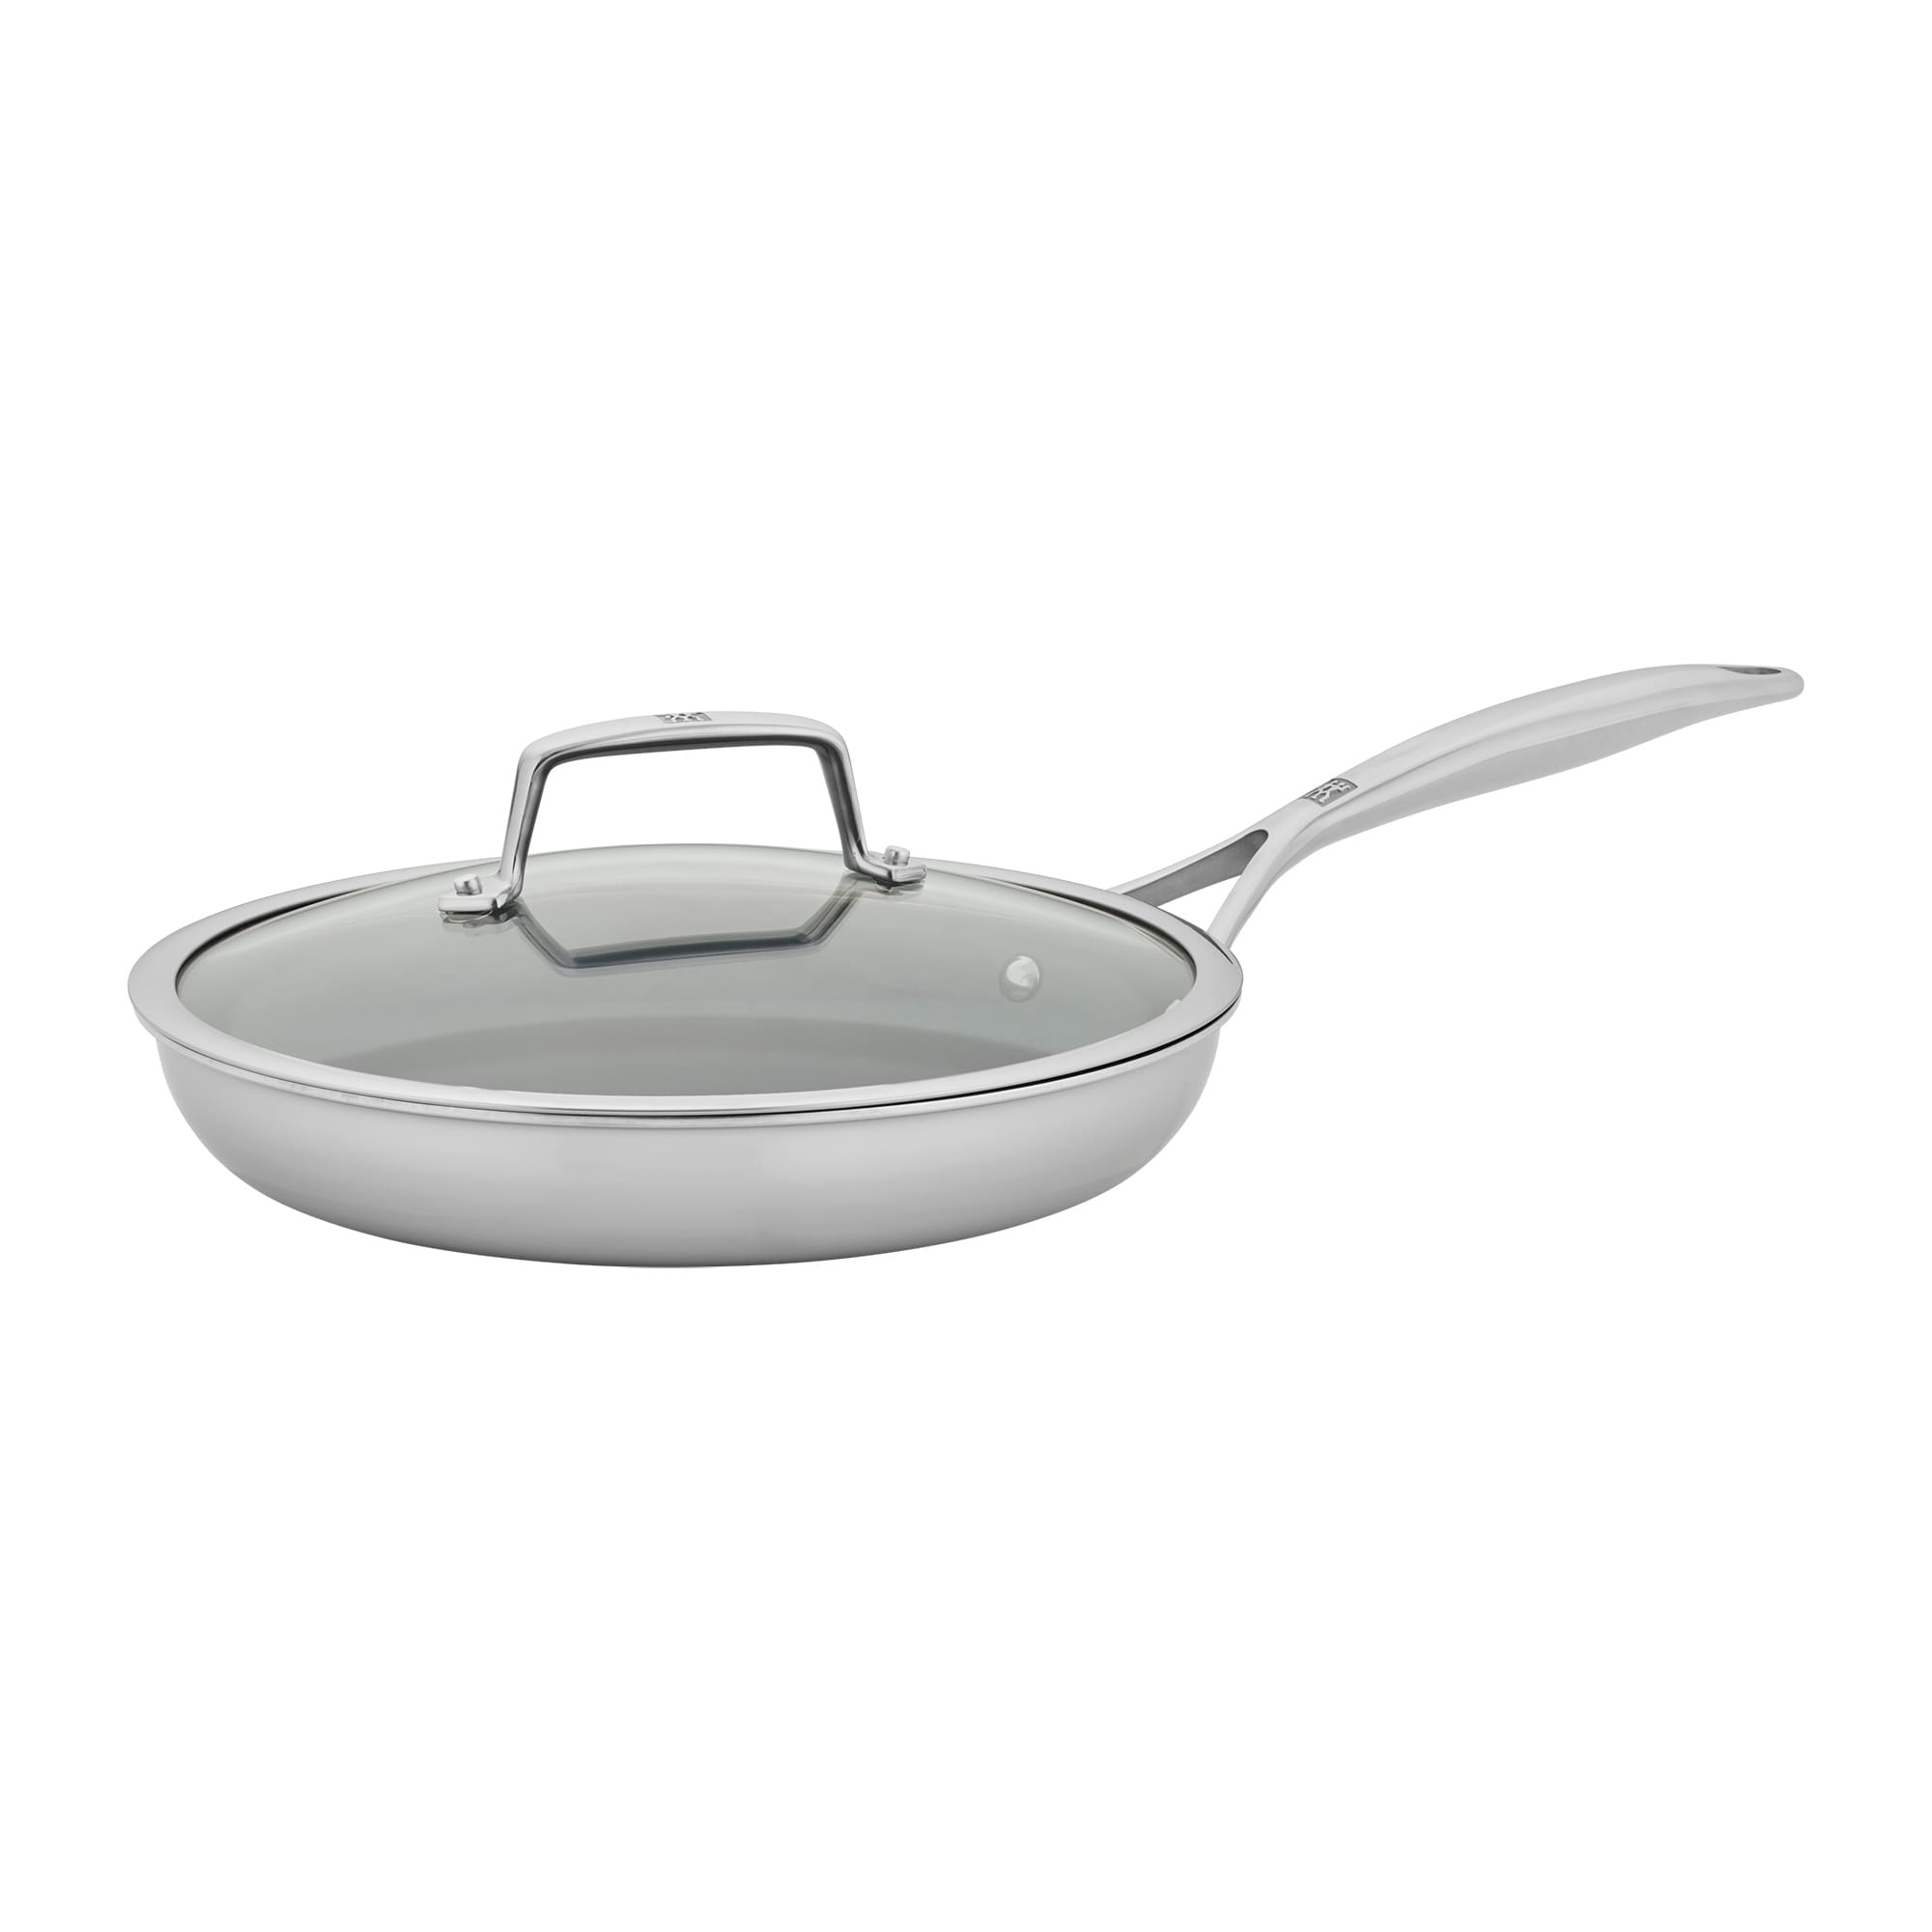 https://ak1.ostkcdn.com/images/products/is/images/direct/077e83bc4bcba9ba78c98b3ebdf9220e86ea2067/ZWILLING-Energy-Plus-10-inch-Stainless-Steel-Ceramic-Nonstick-Fry-Pan-with-Lid.jpg